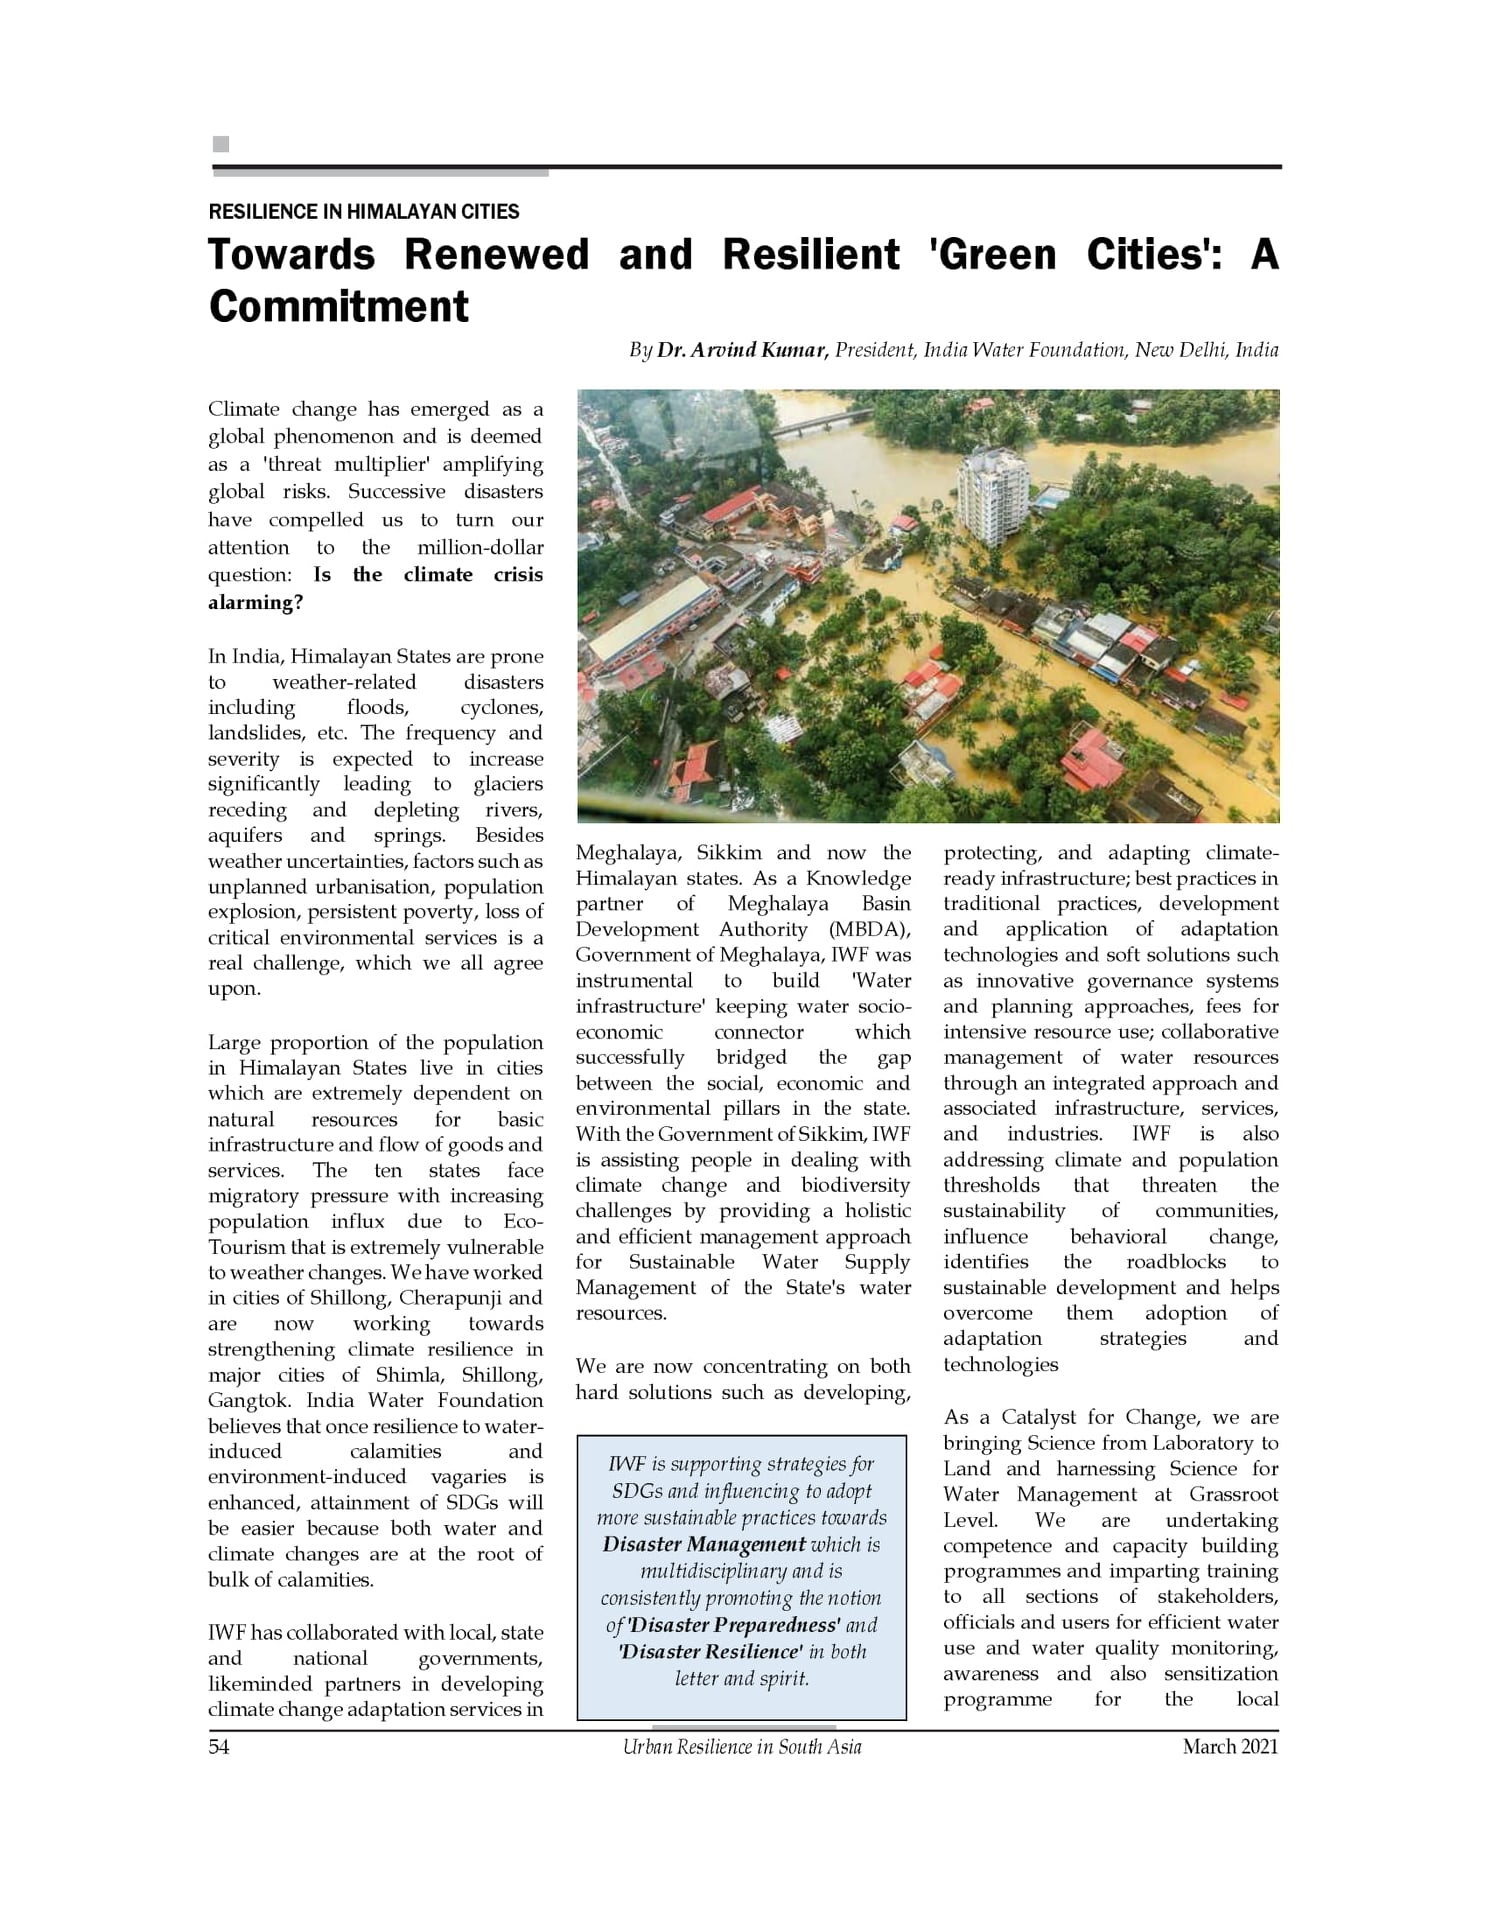 Dear Friends, please find my article on "Towards Renewed and Resilient Green Cities: A Commitment&rdquo; published in &lsquo;Urban Resilience in South A...